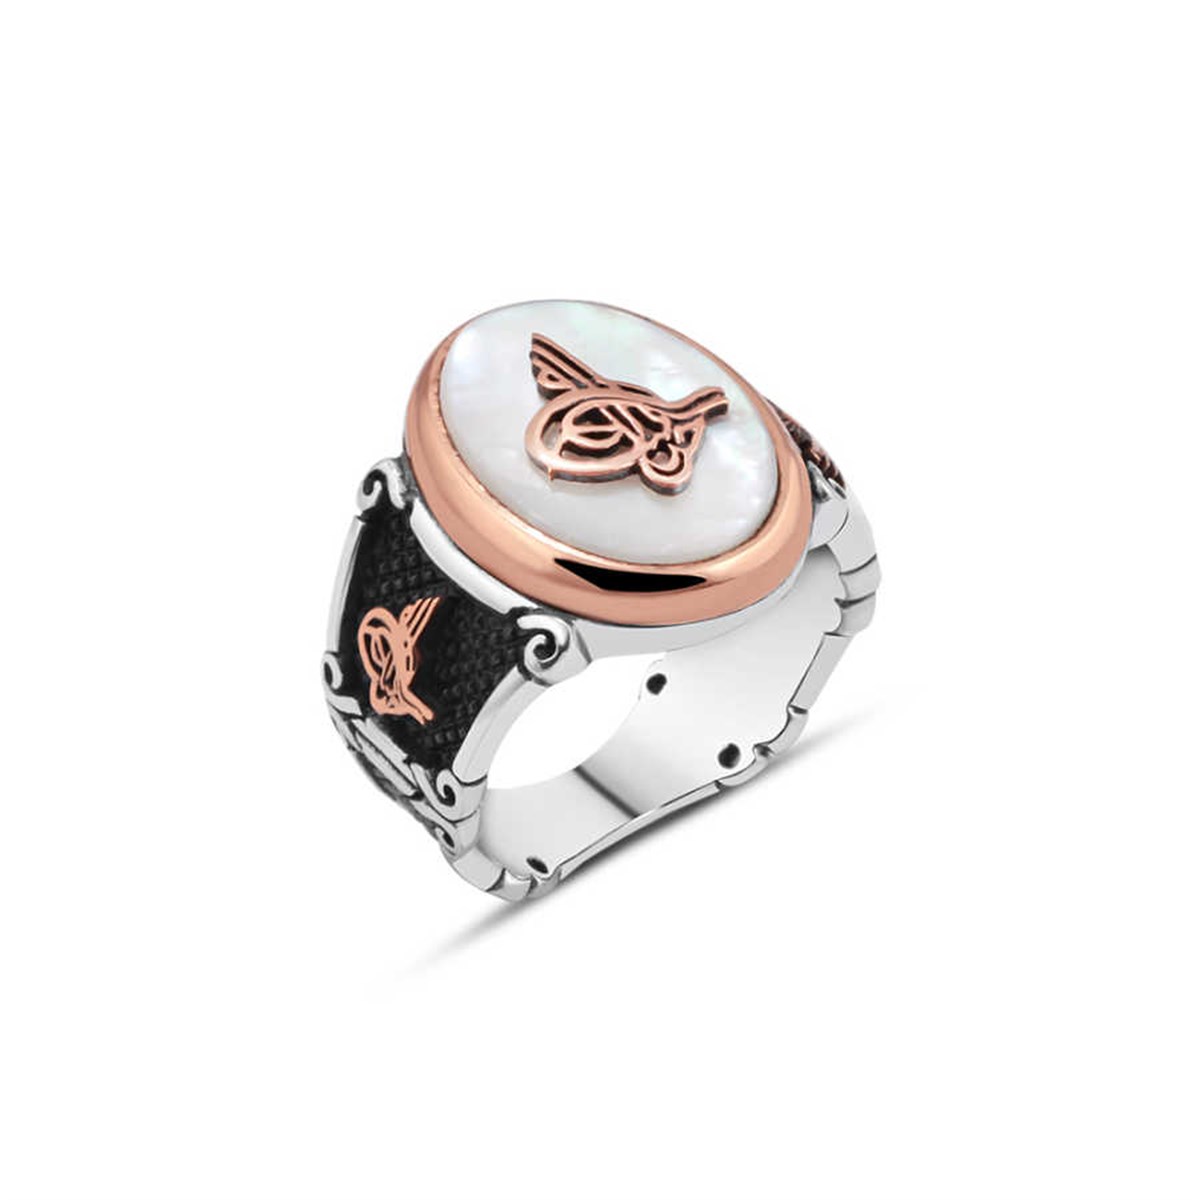 Sterling Silver Men's Ring with Mother of Pearl Stone and Tugra